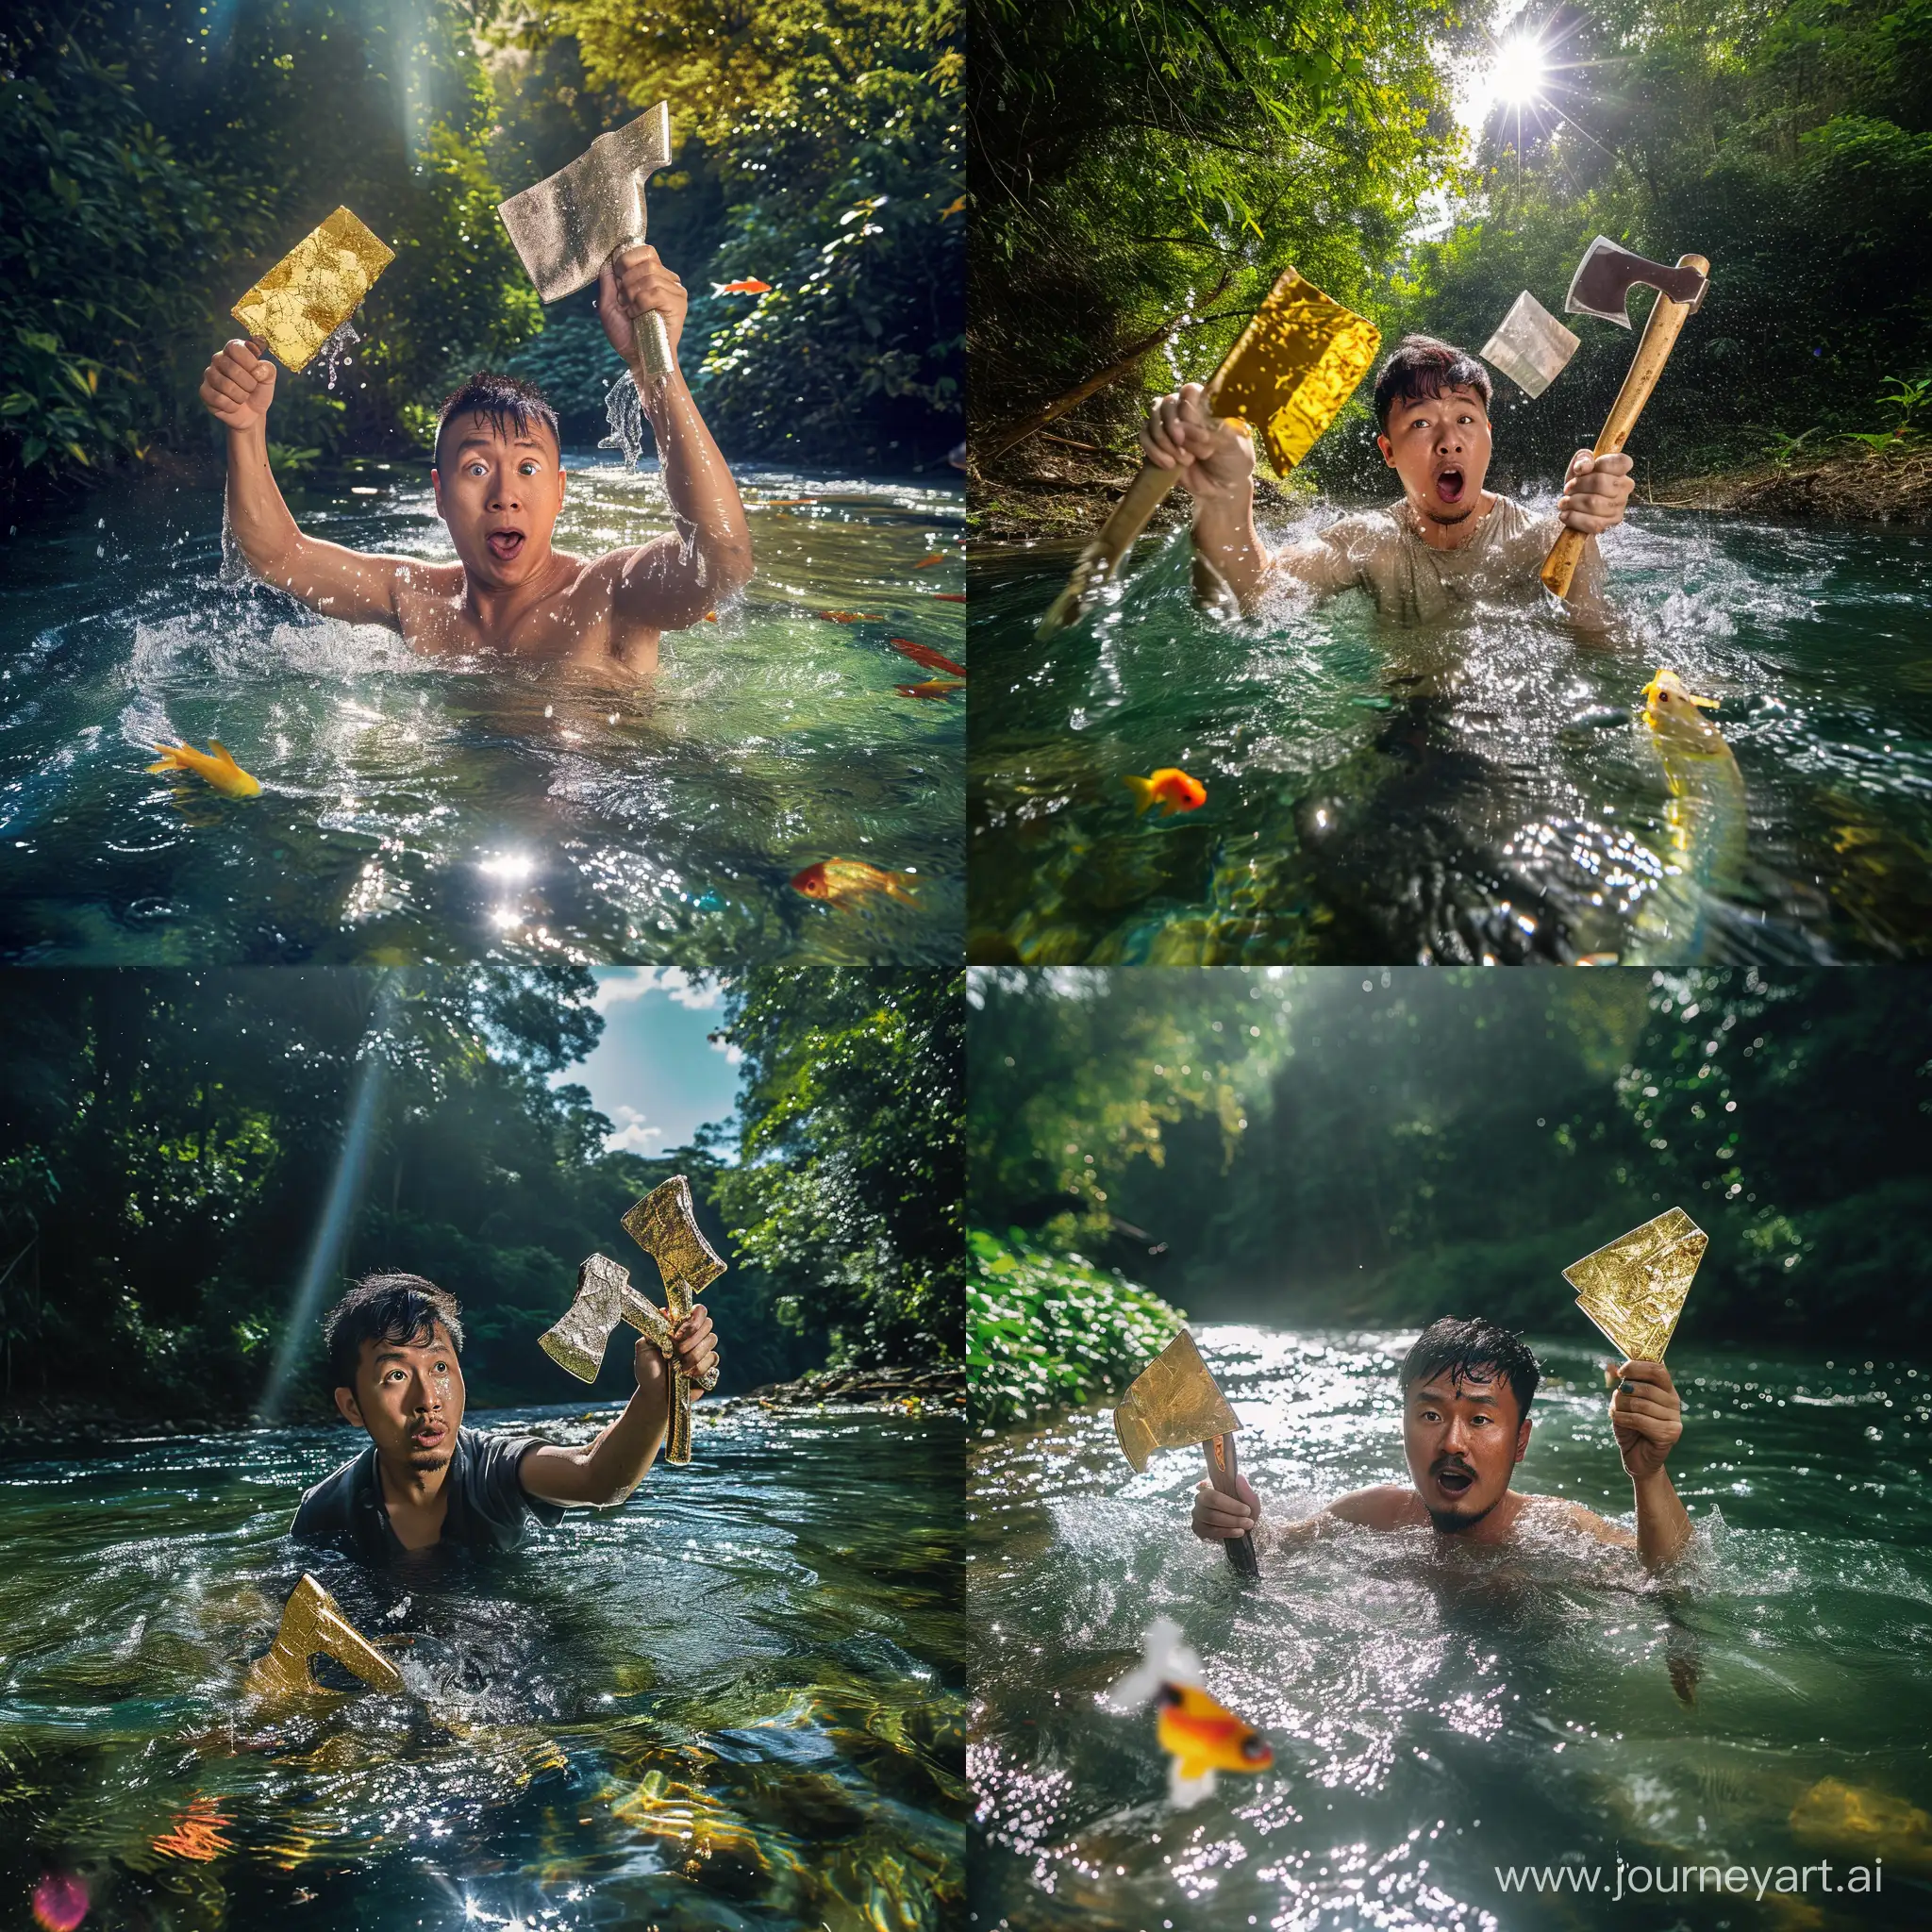 A man of East Asian descent is seen waist-deep in a river. His face shows a look of surprise as he holds up two axes, one of gold and one of silver, that he found beneath the water's surface. The sunlight dances off the surface of the water and reflects on the axes, making them gleam. The surrounding landscape is verdant, with lush trees lining the river bank. You can also see some colorful fish swimming around the man's legs, adding a touch of lively energy to the serene scene.